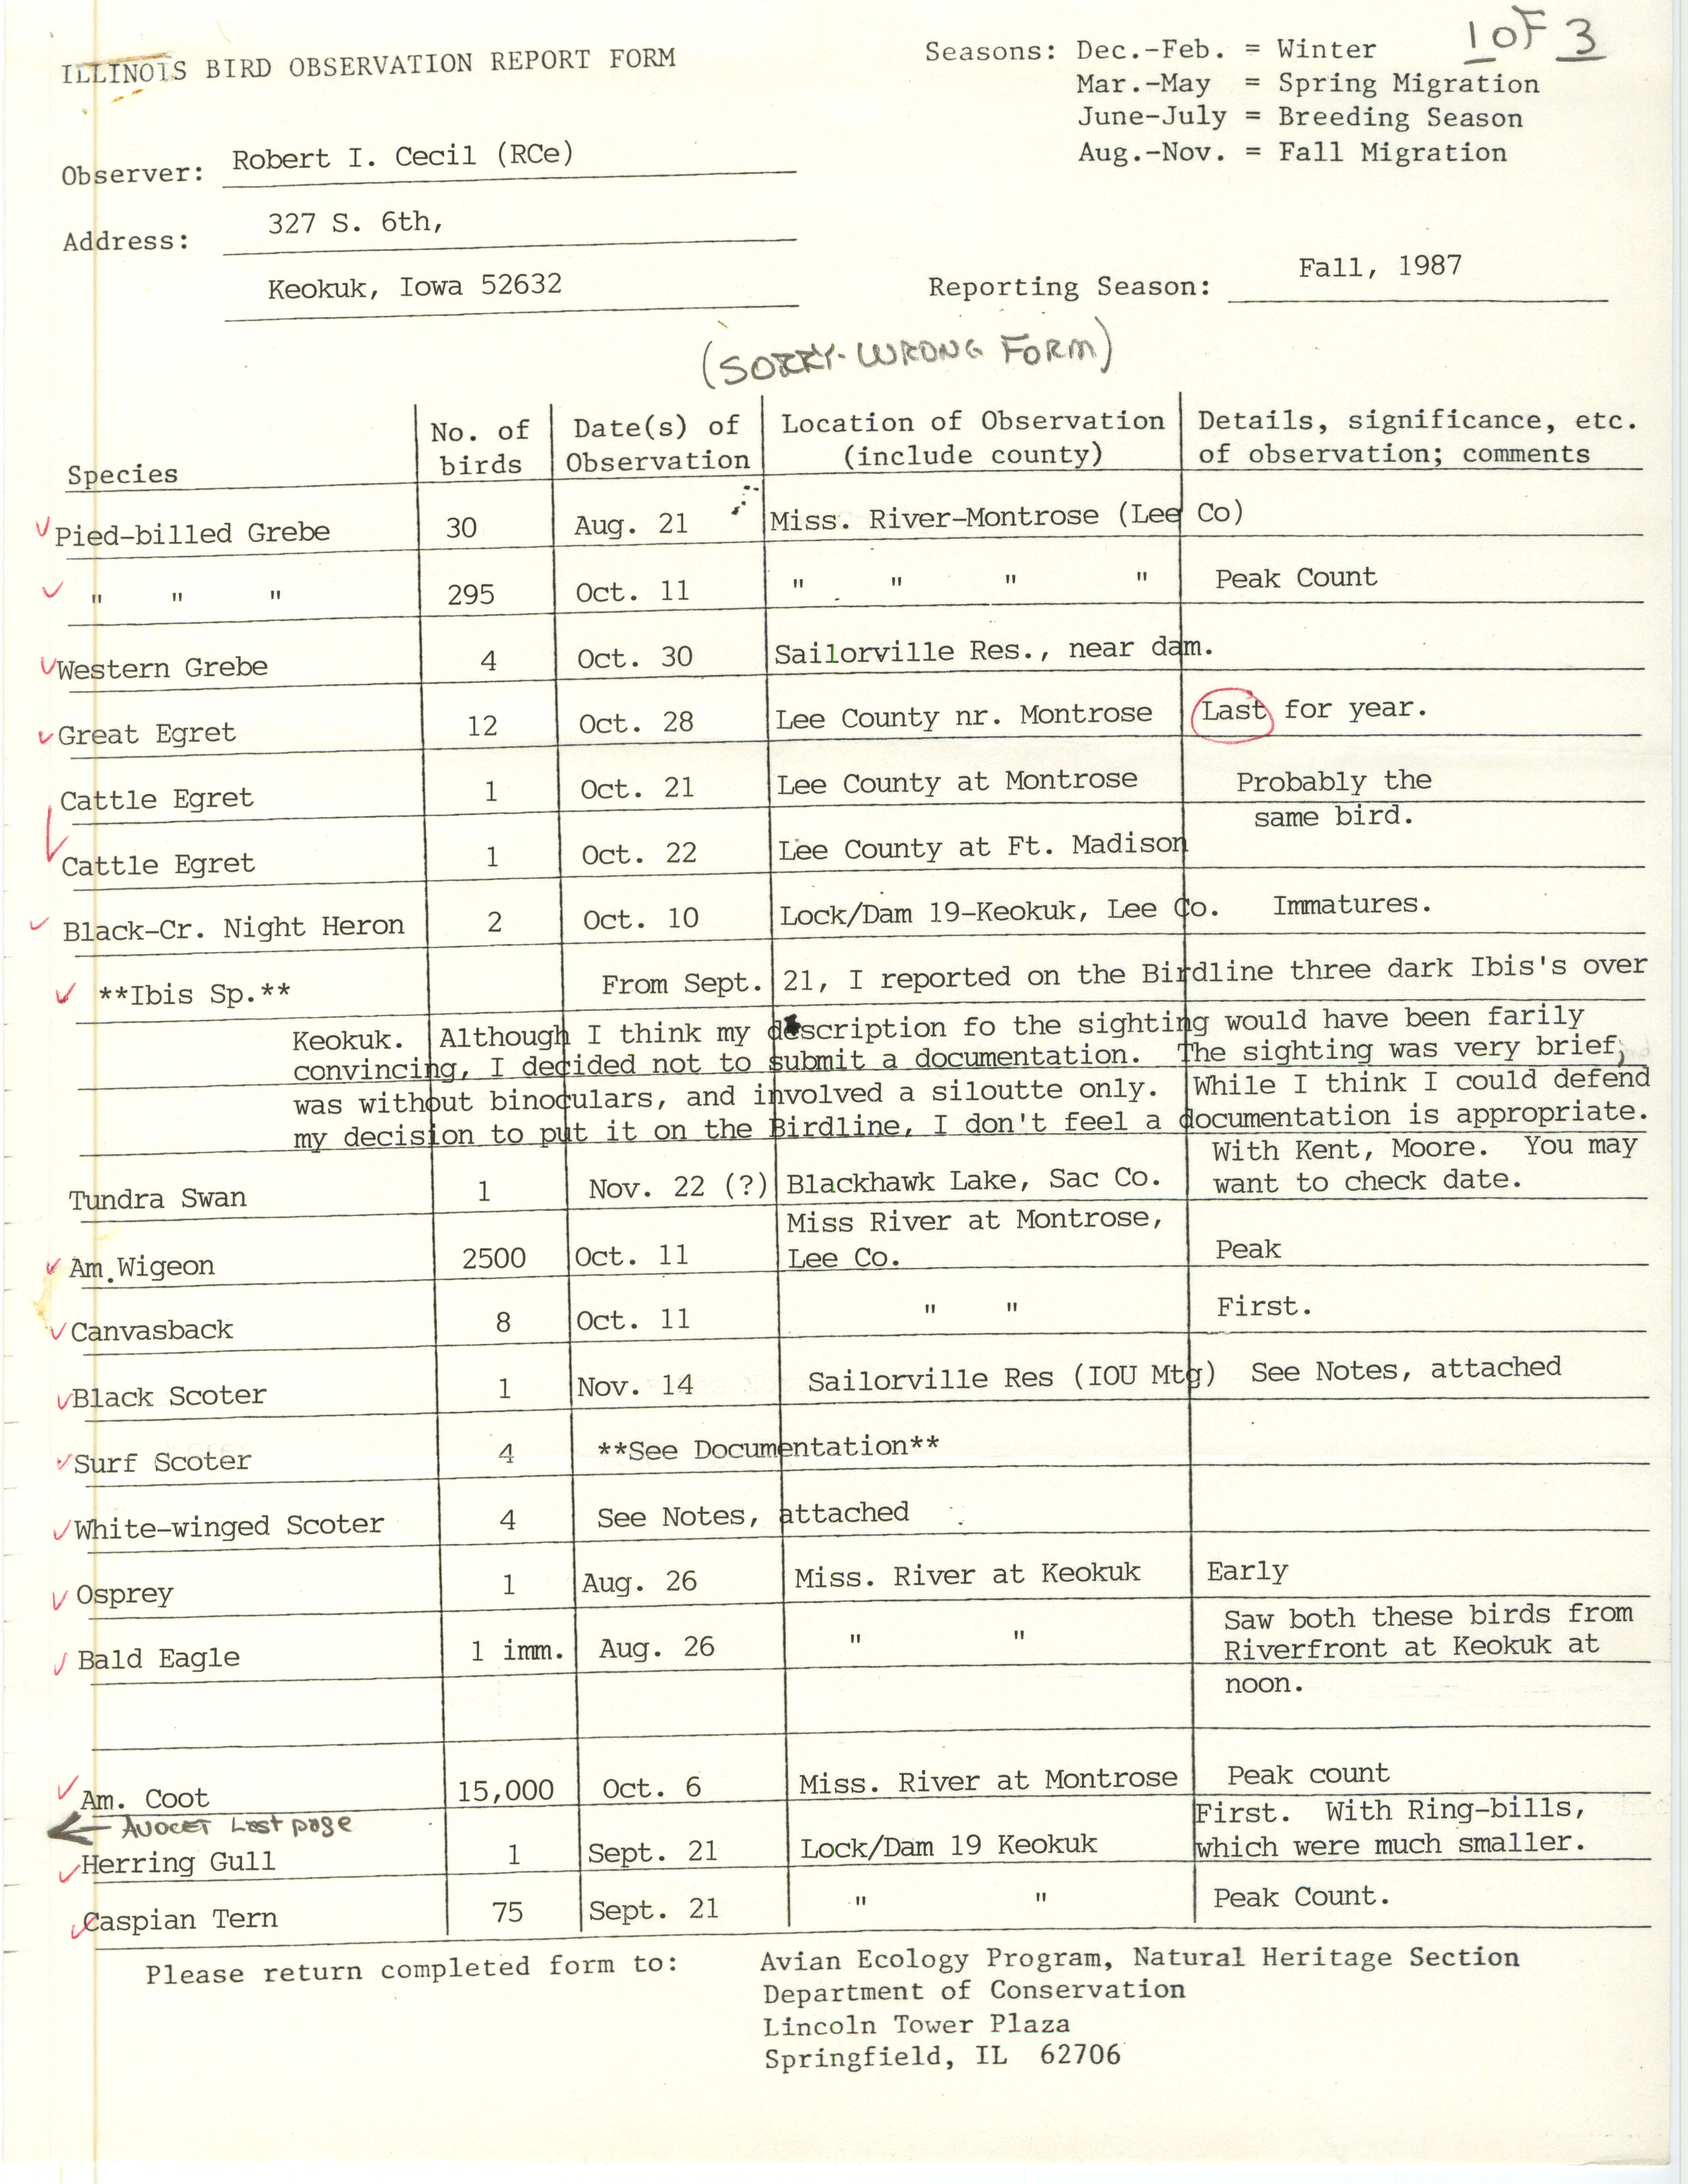 Field reports form for submitting seasonal observations of Iowa birds, Robert I. Cecil, fall 1987